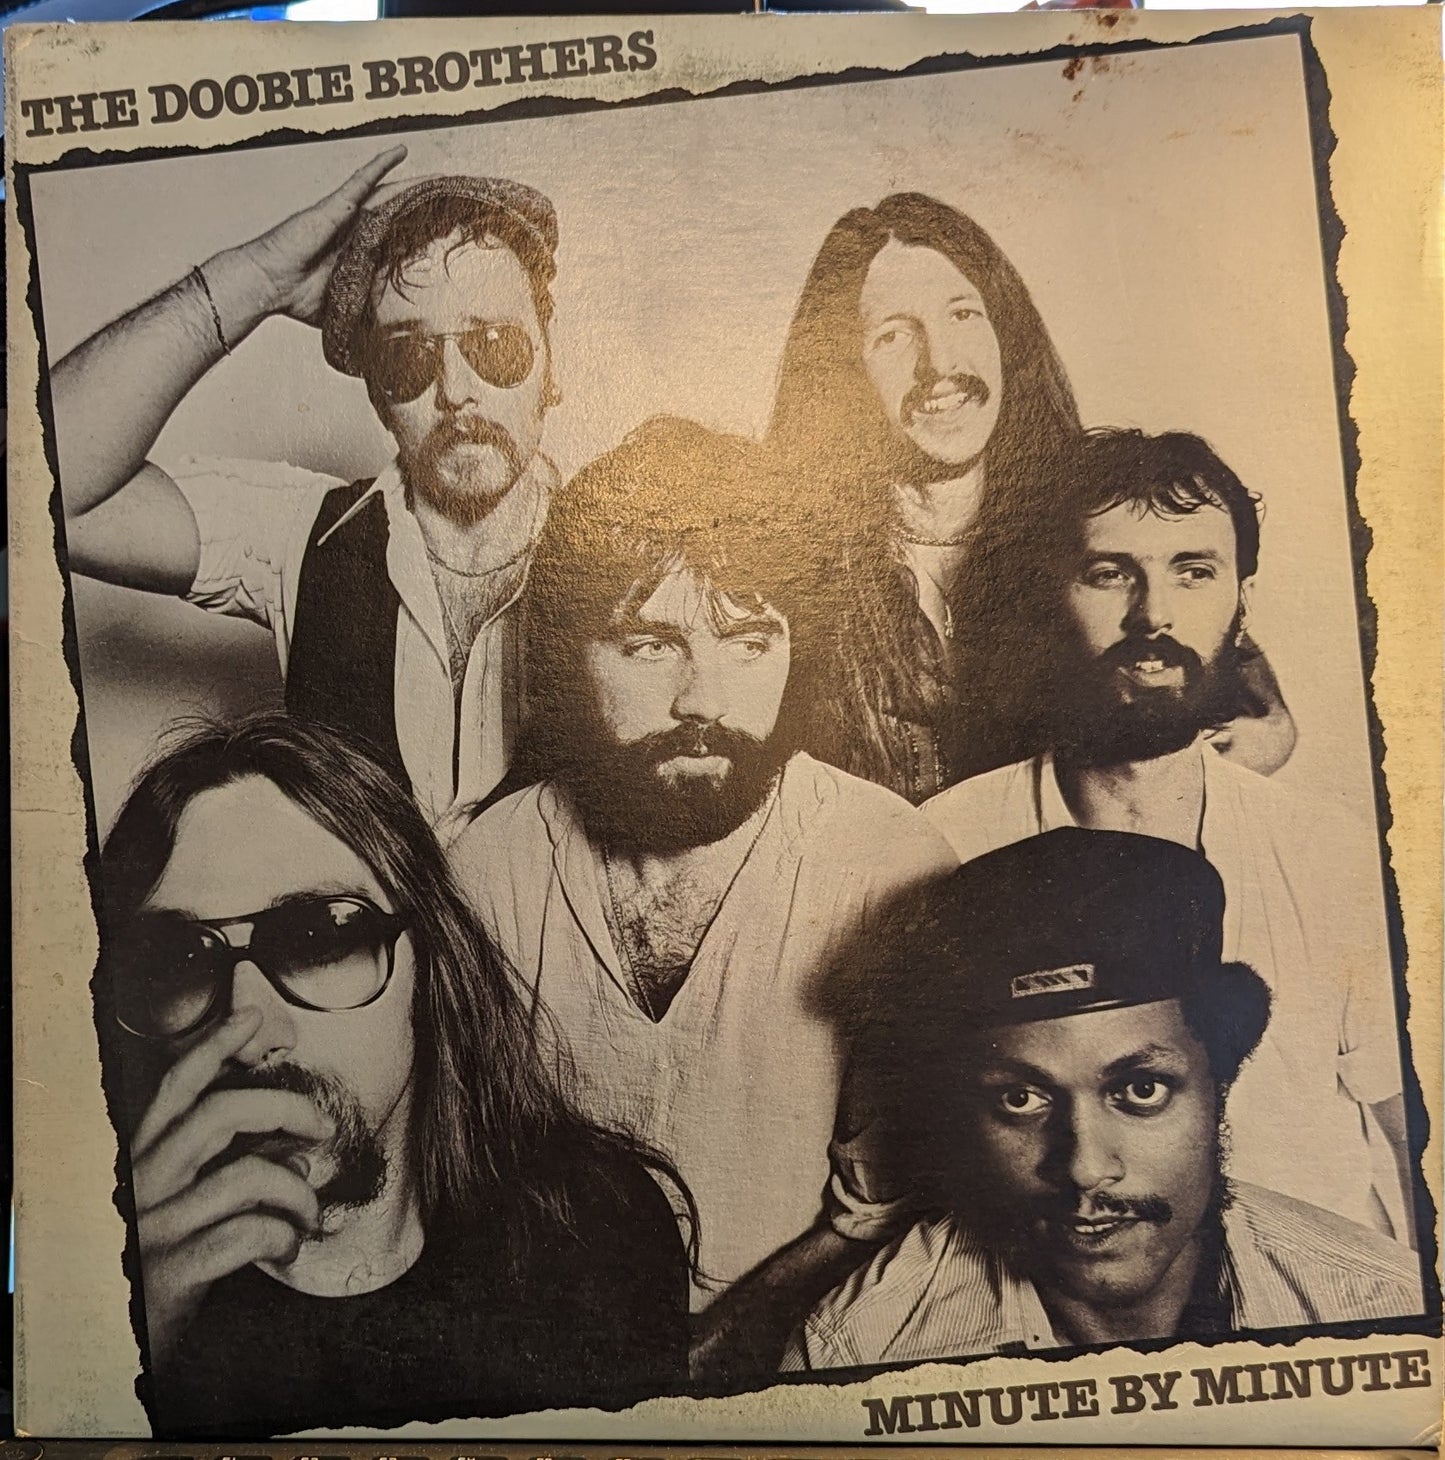 The Doobie Brothers Minute By Minute *RCA CLUB* LP Near Mint (NM or M-) Very Good Plus (VG+)